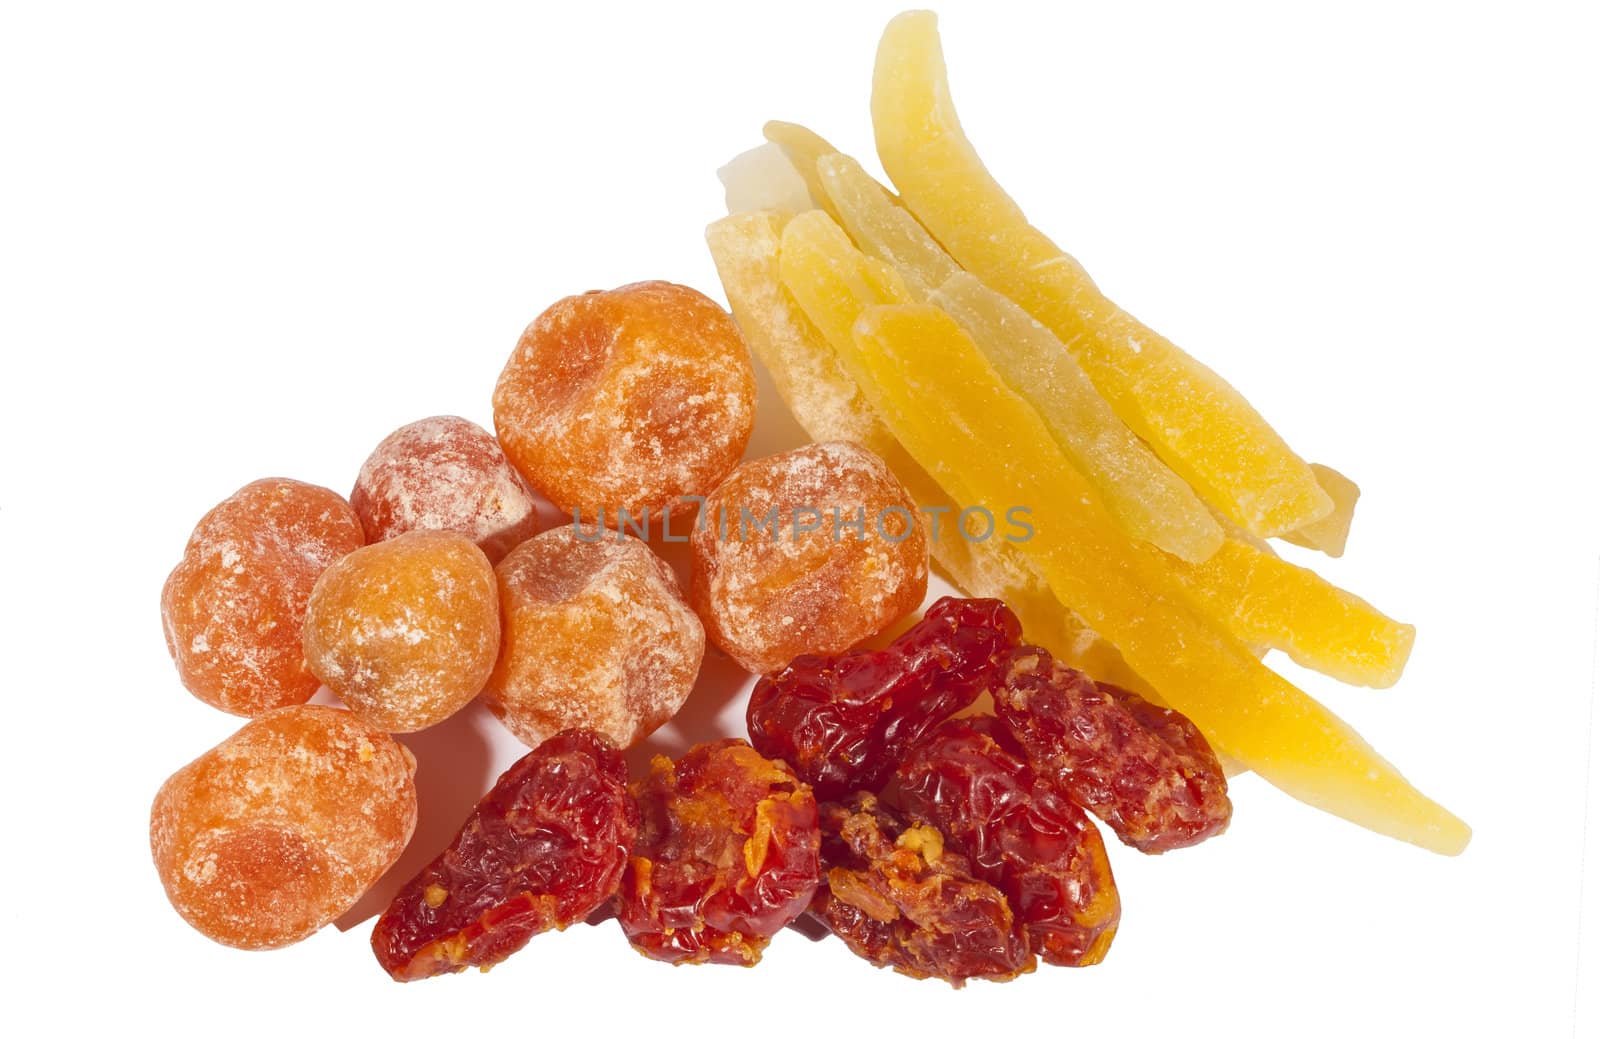 Dried fruits composition isolated on white by RawGroup